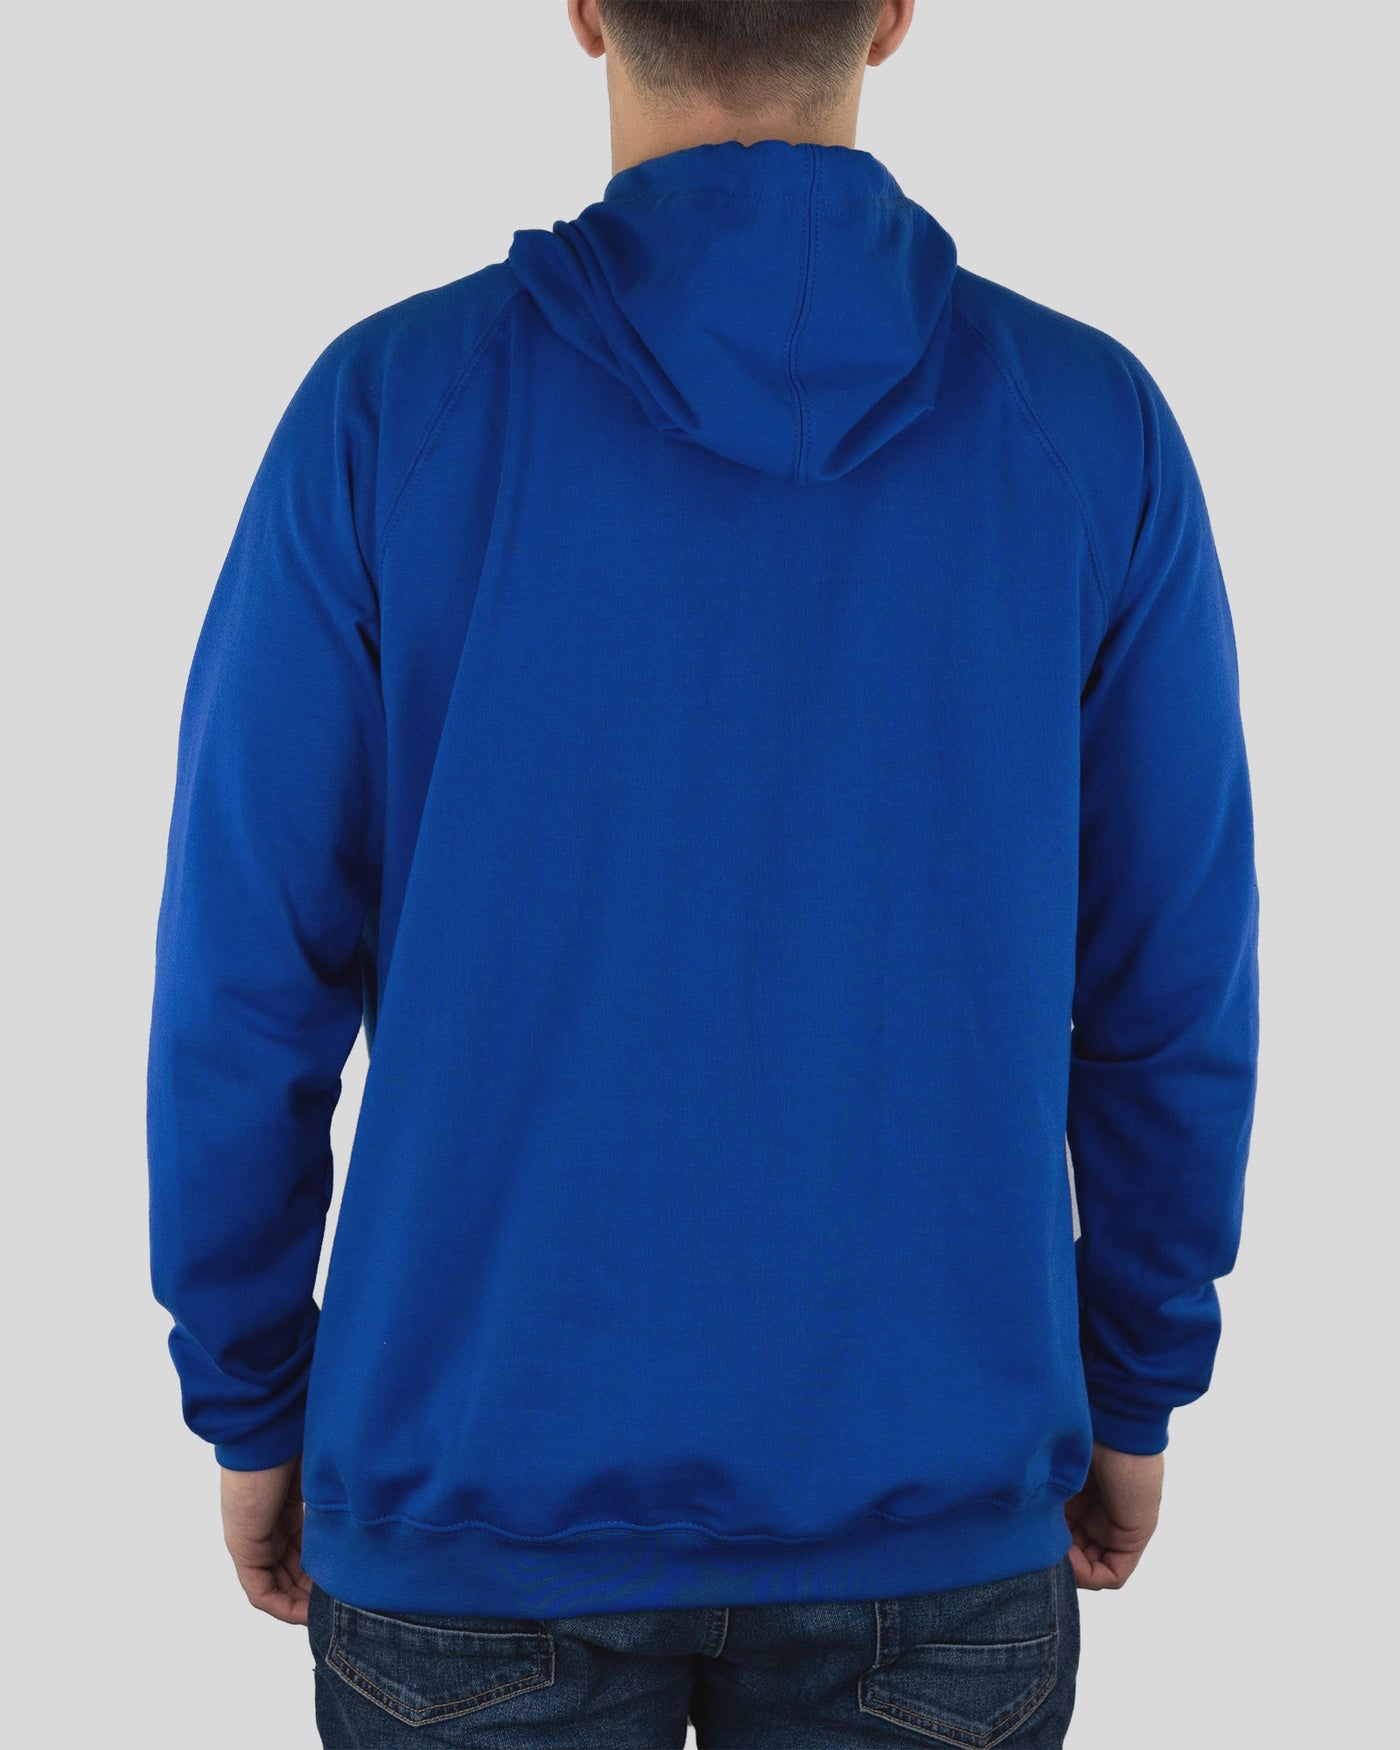 Sudadera con capucha Outfield Fence - Texas Rangers